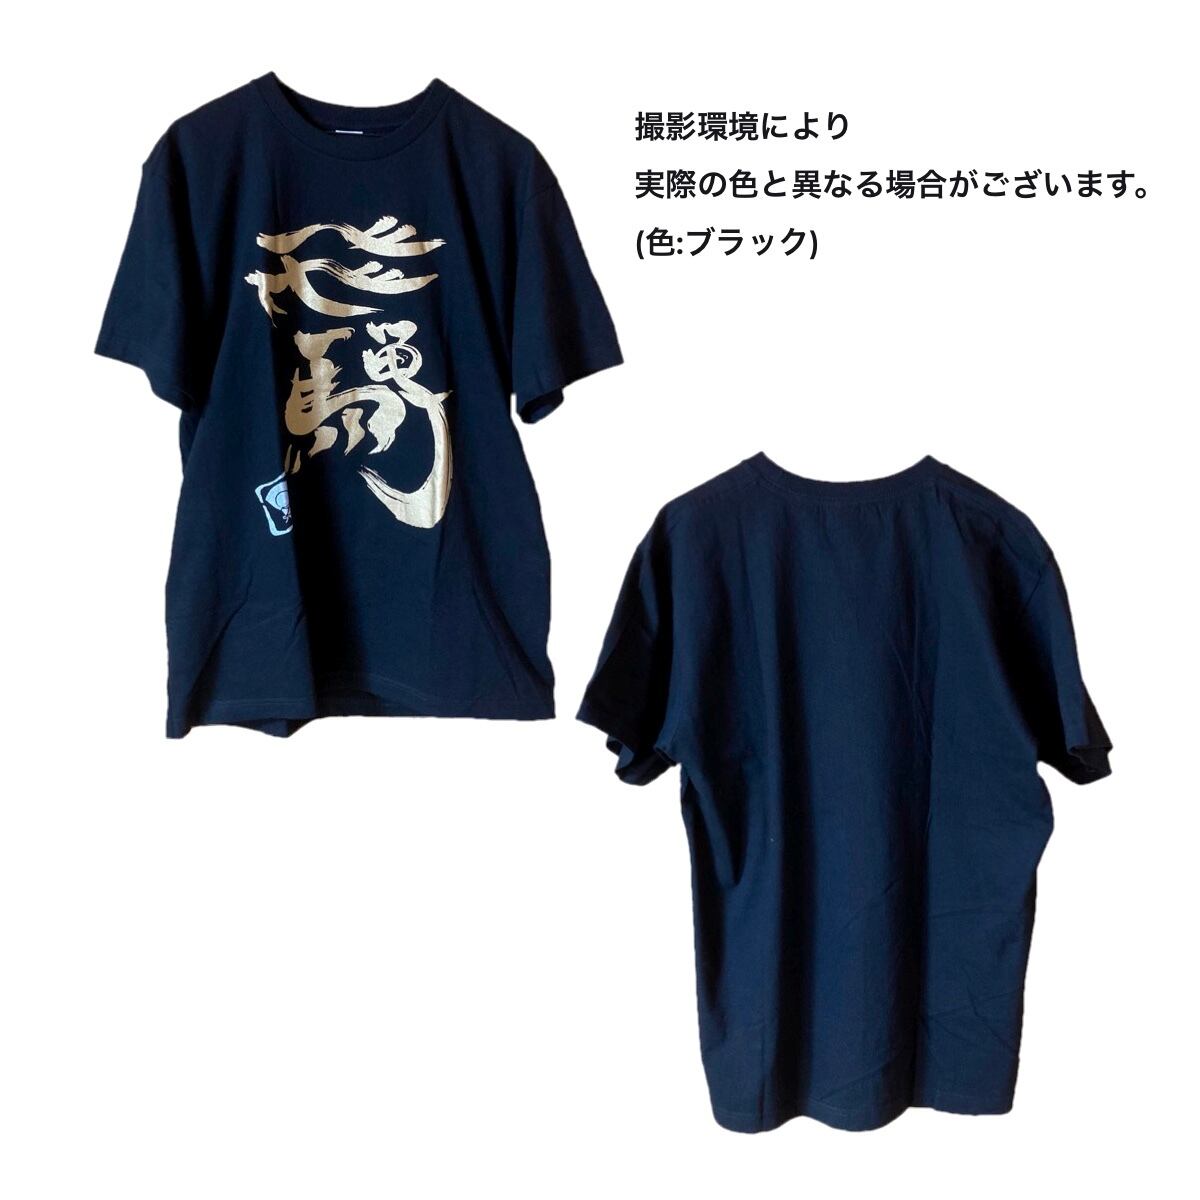 robes&confections リネンTシャツ ゴールド文字